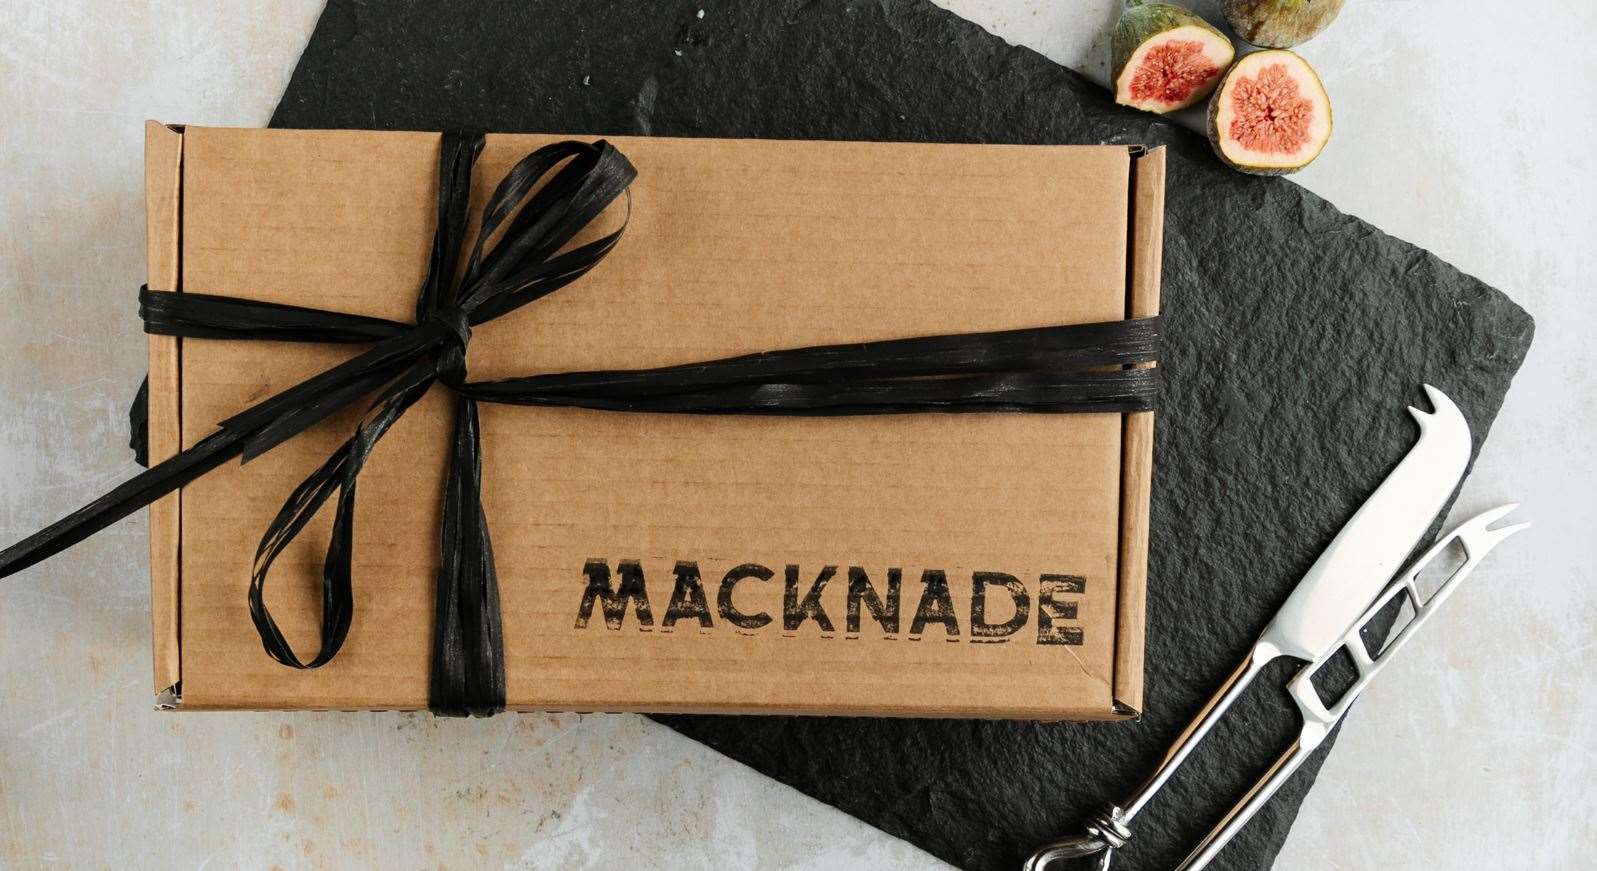 Macknade will deliver cheese subscription boxes nationwide for free